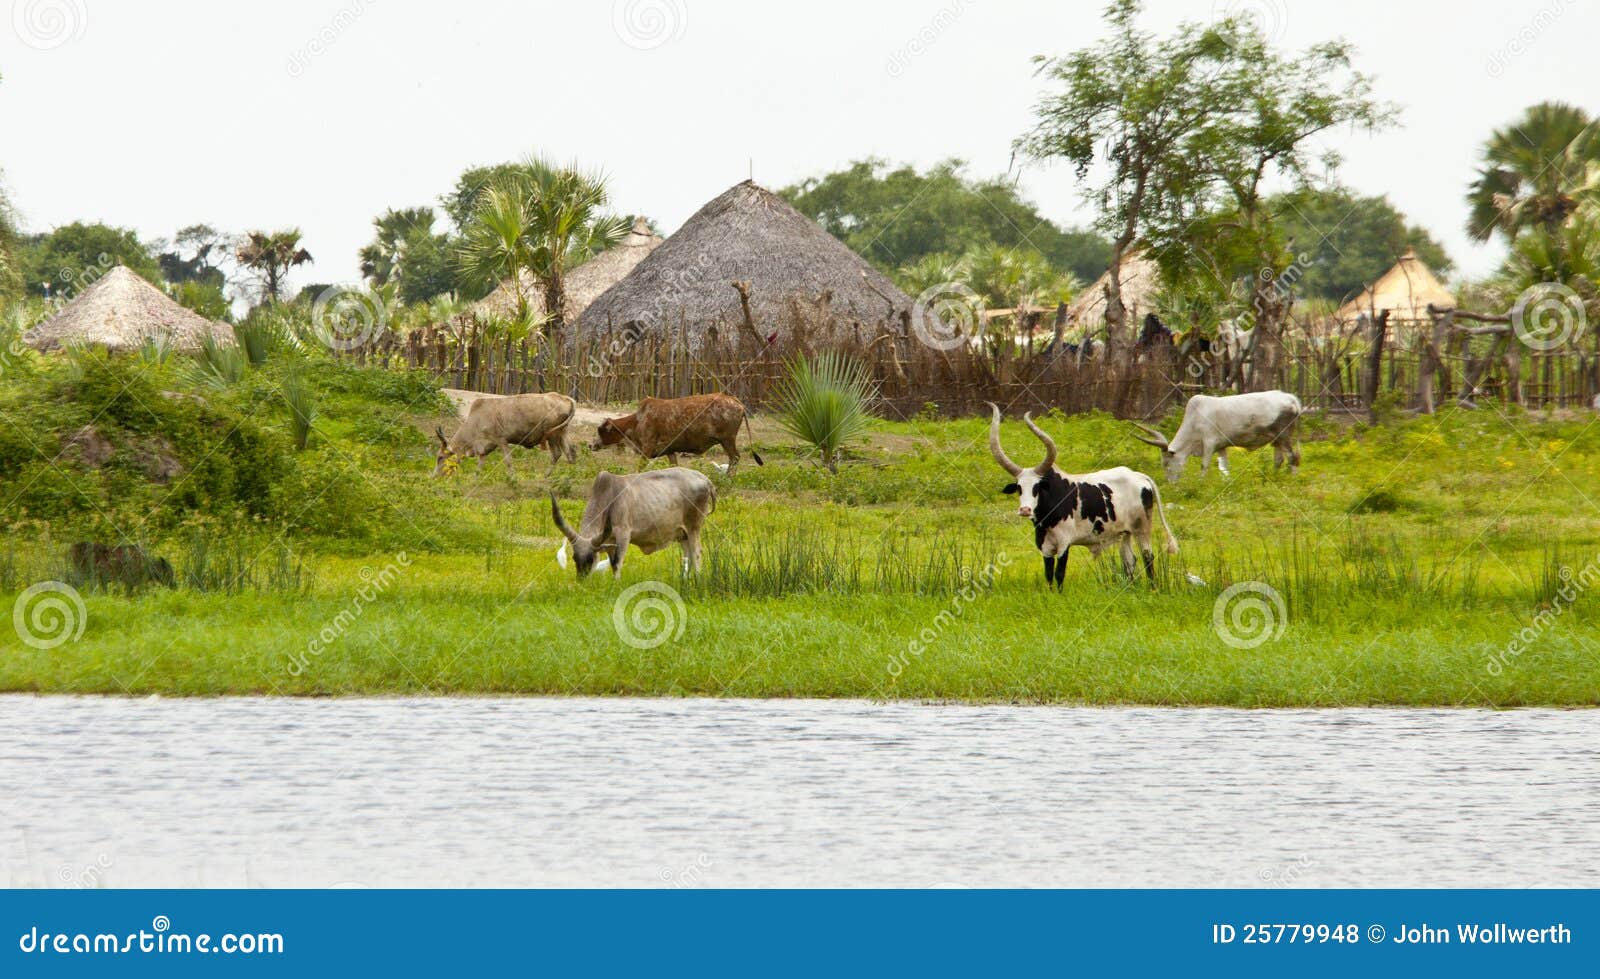 cattle at the nile river in south sudan